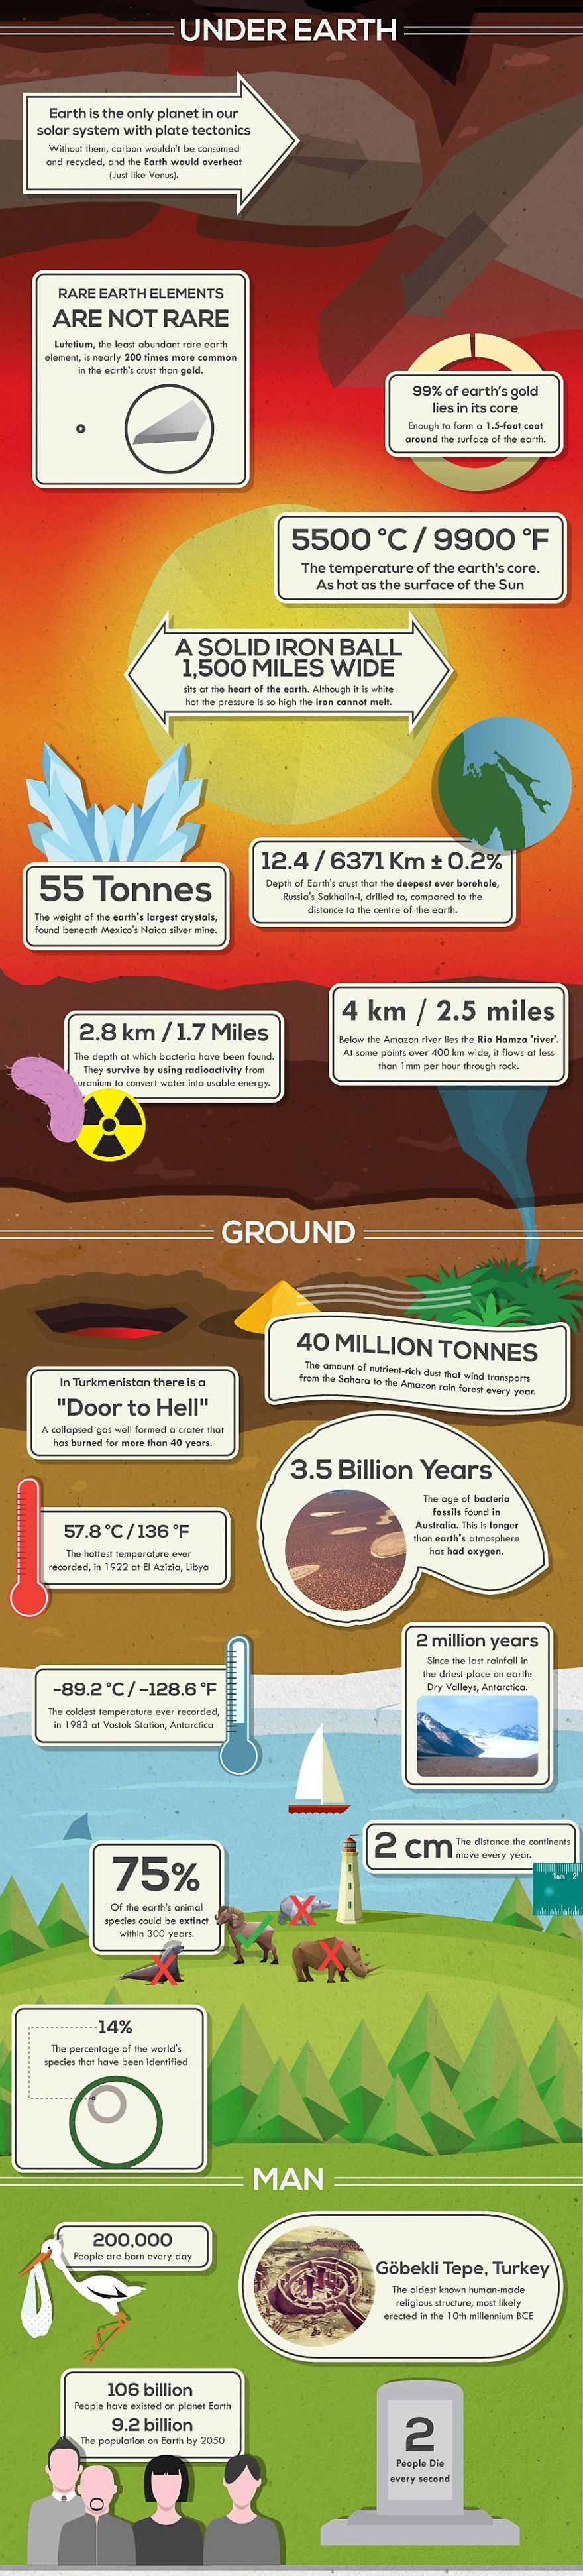 50 Surprising Facts About Planet Earth You've Probably Never Heard Before